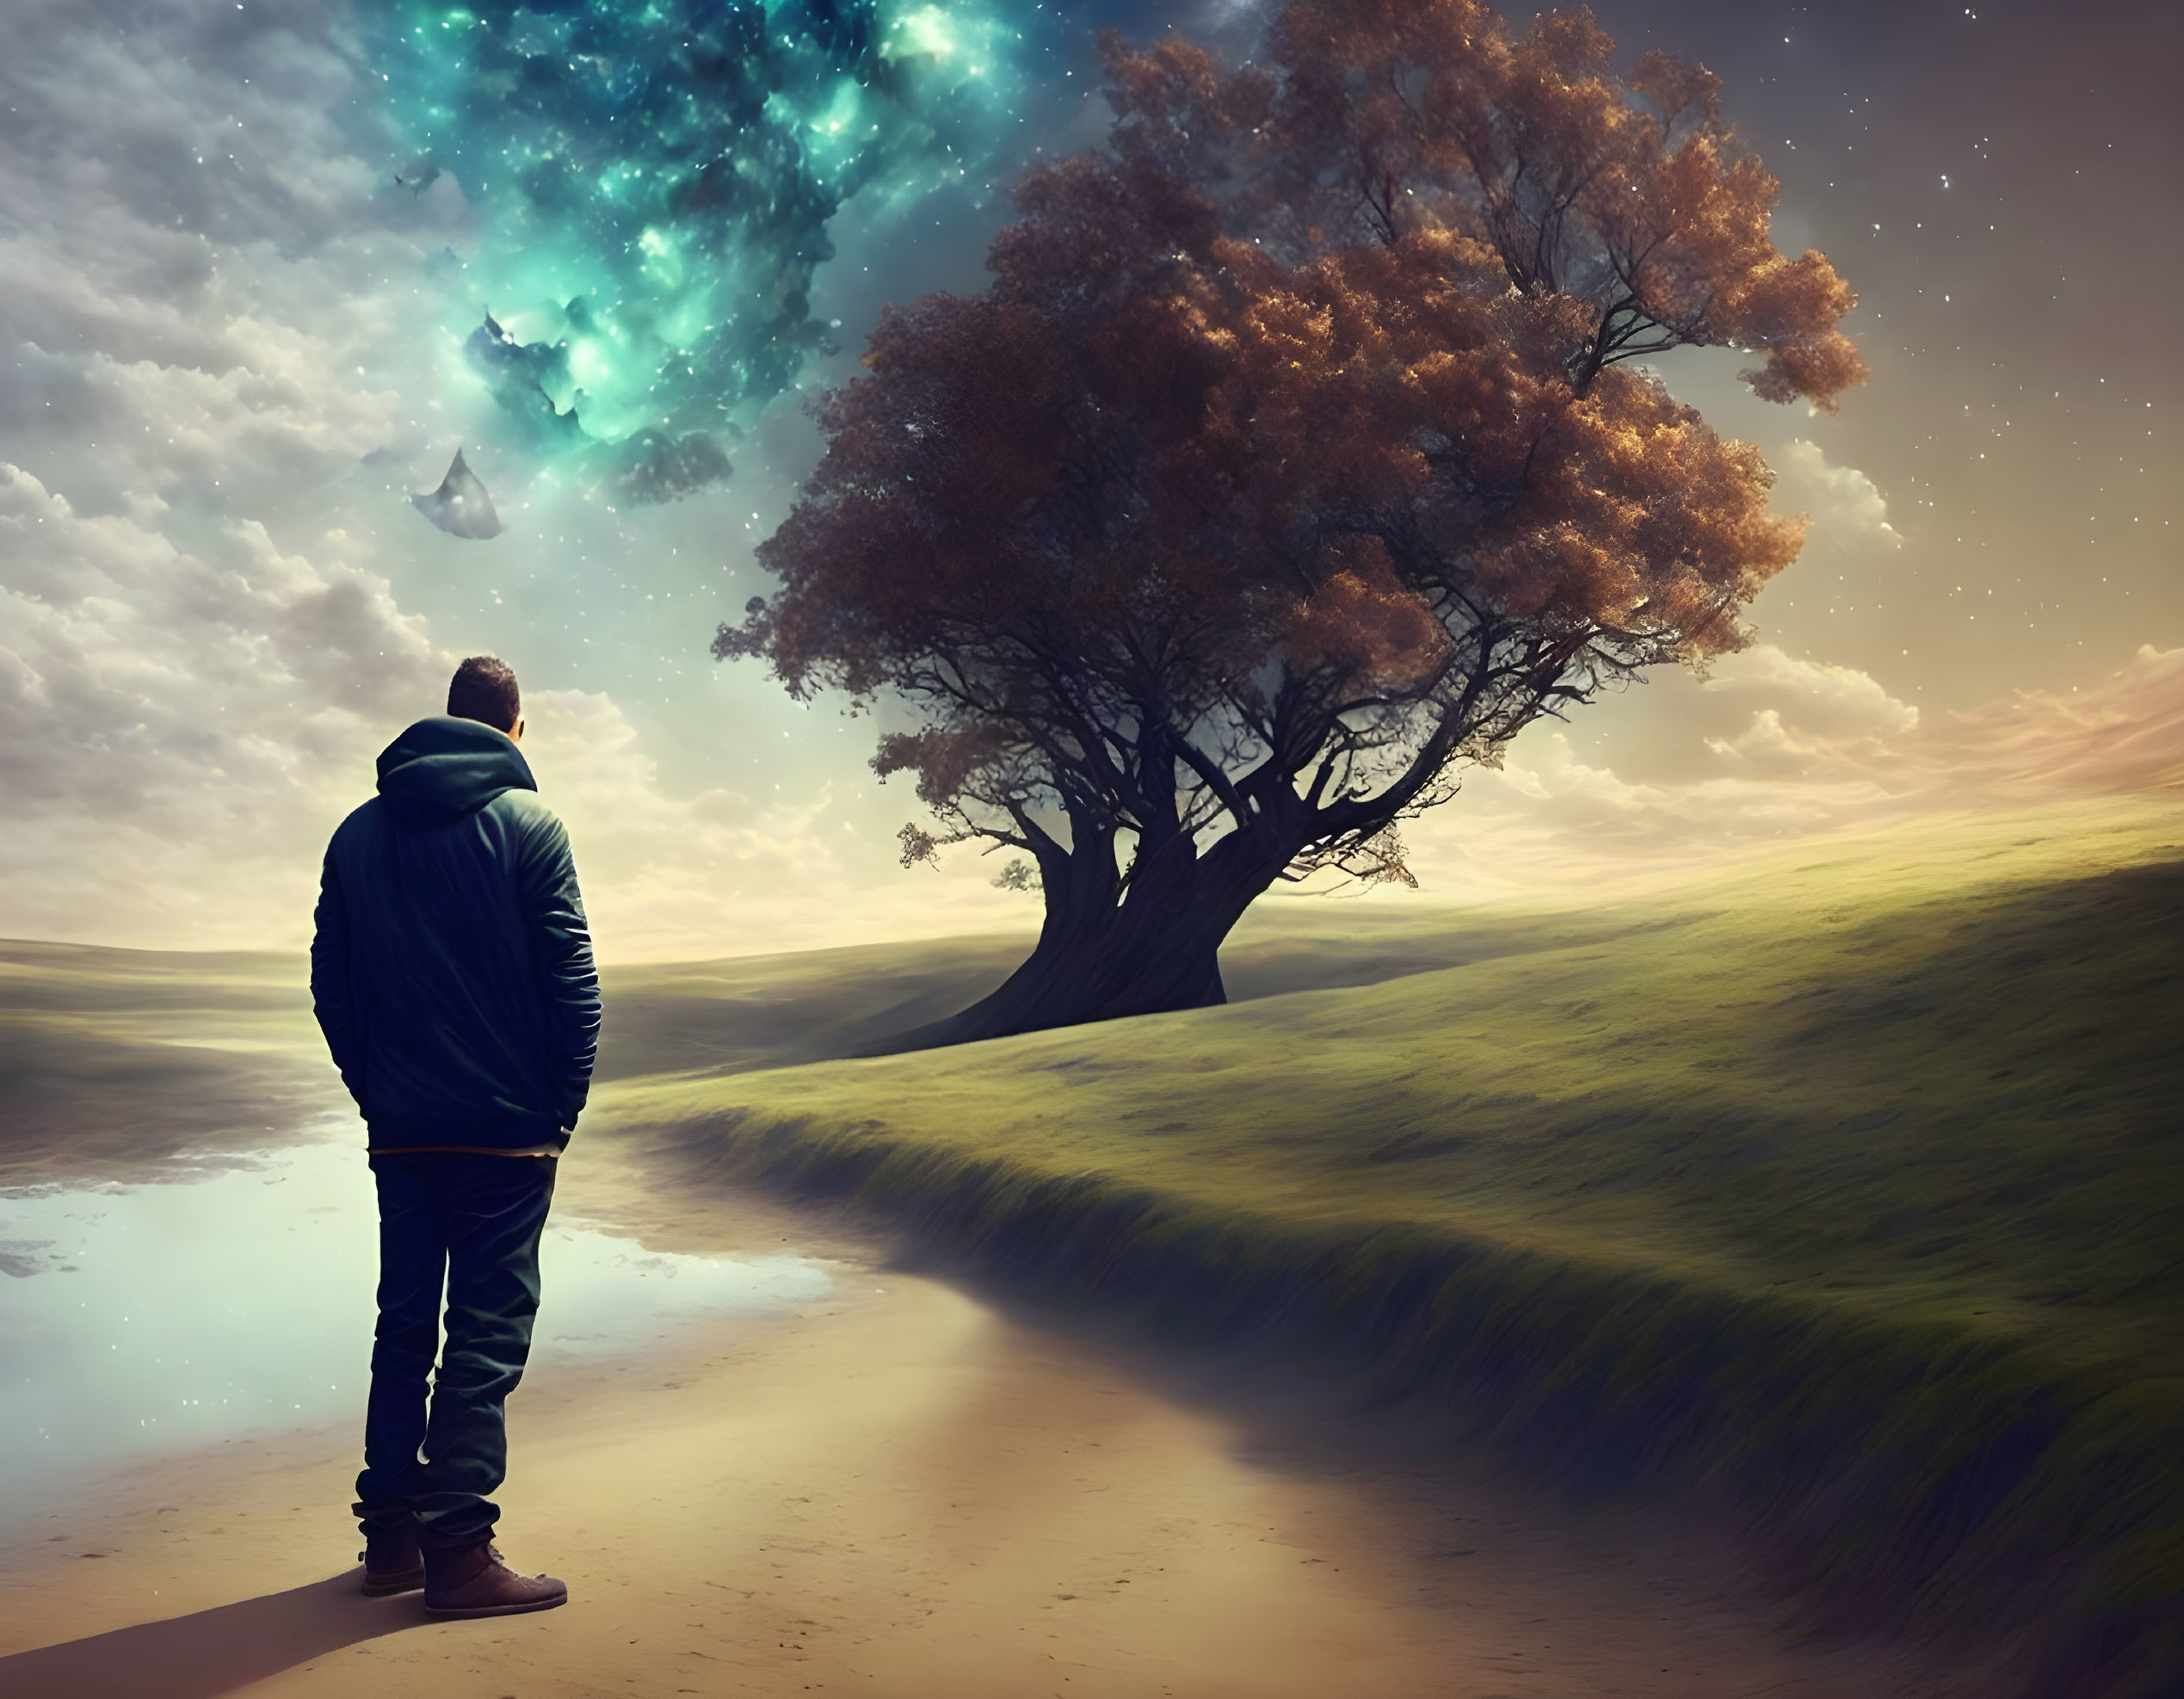 Person admiring tree and surreal nebula on grassy hill with floating rock and cloth.